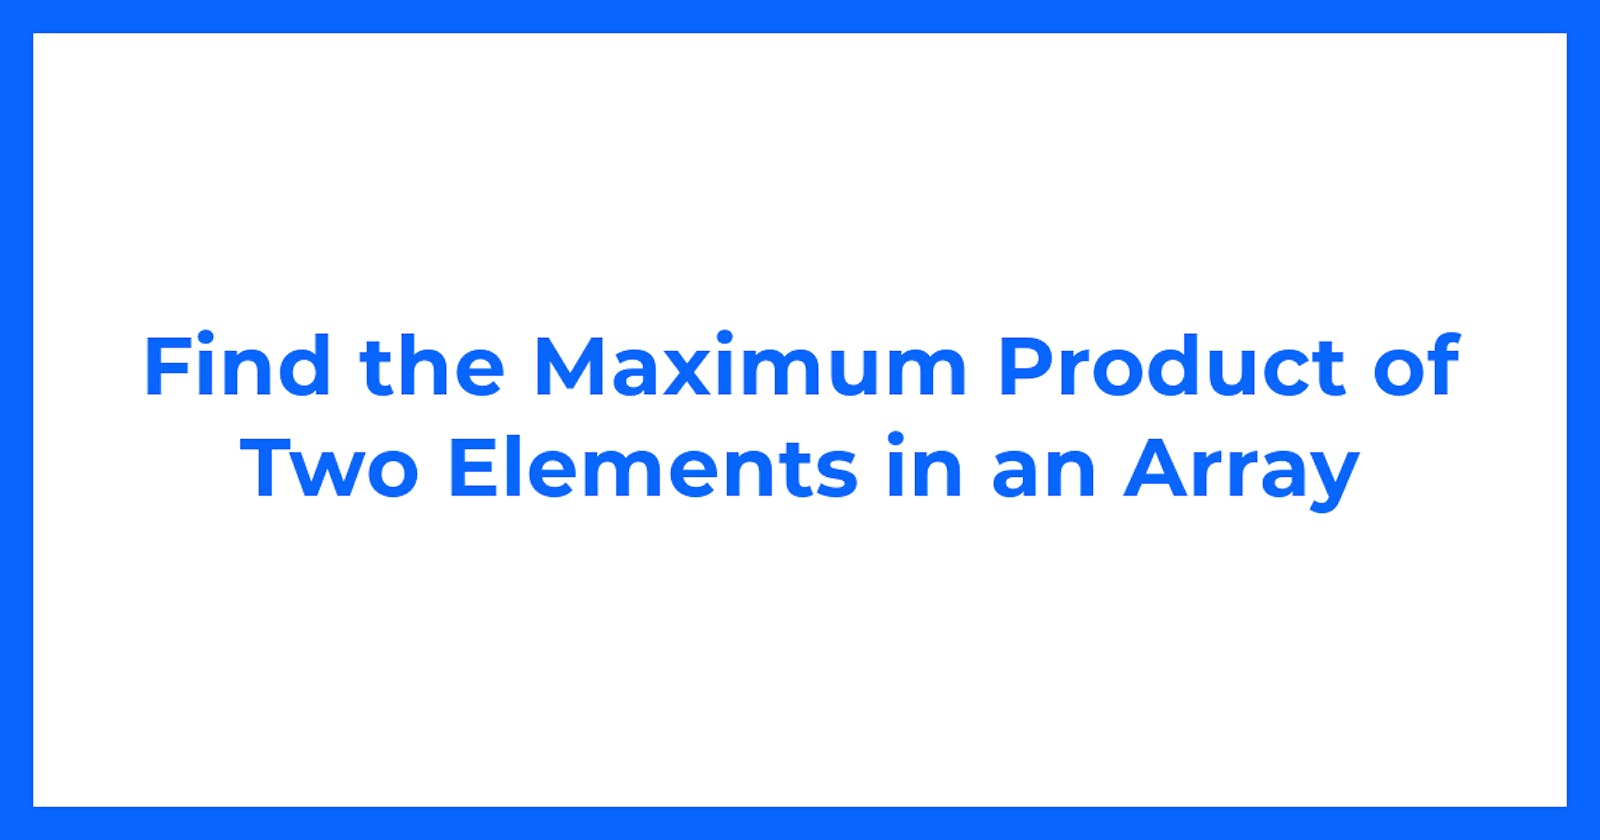 Find the Maximum Product of Two Elements in an Array